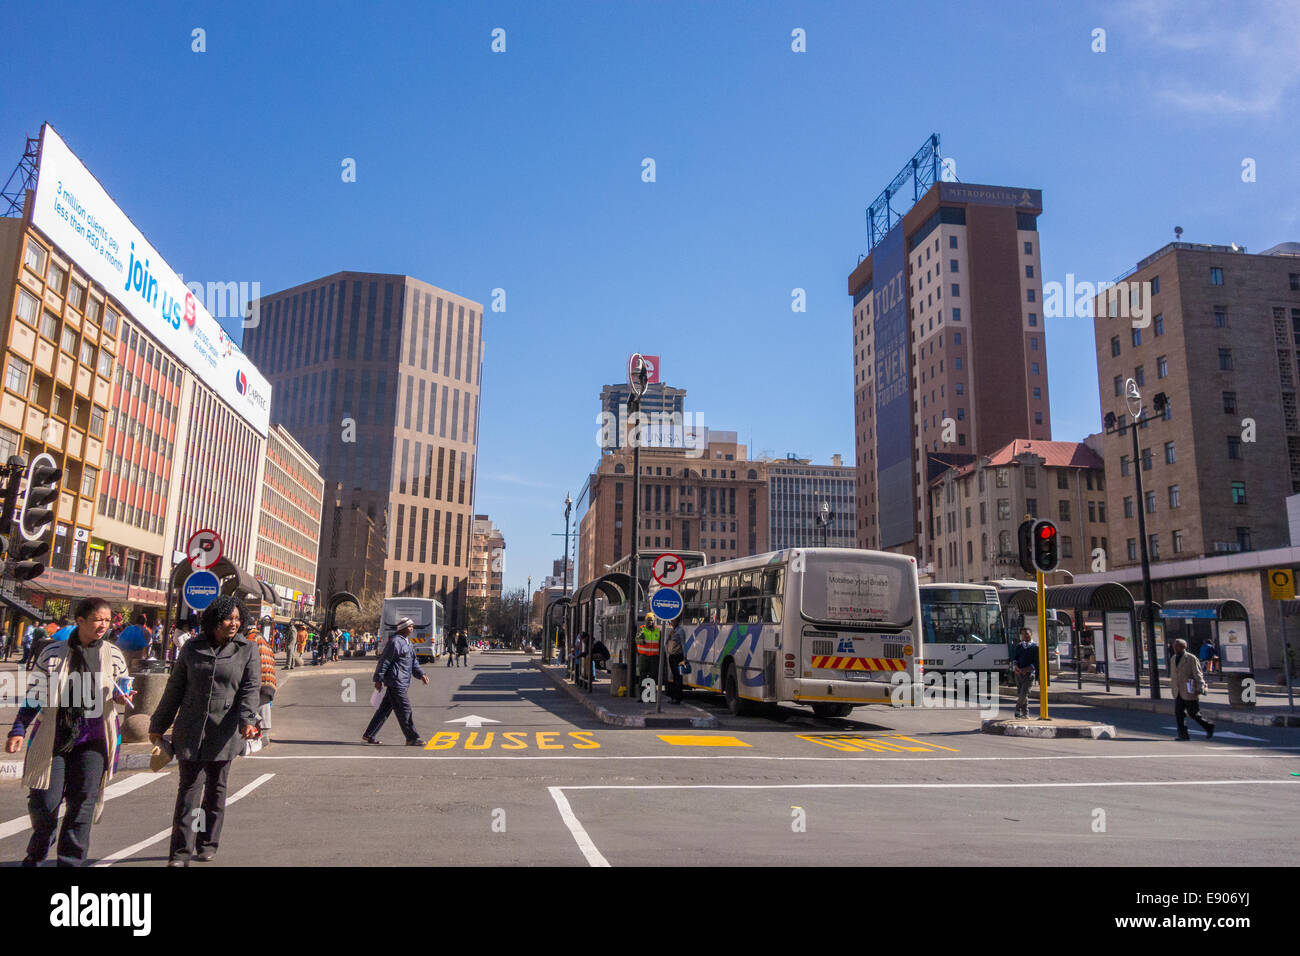 JOHANNESBURG, SOUTH AFRICA - Pedestrians and buses in city centre. Stock Photo